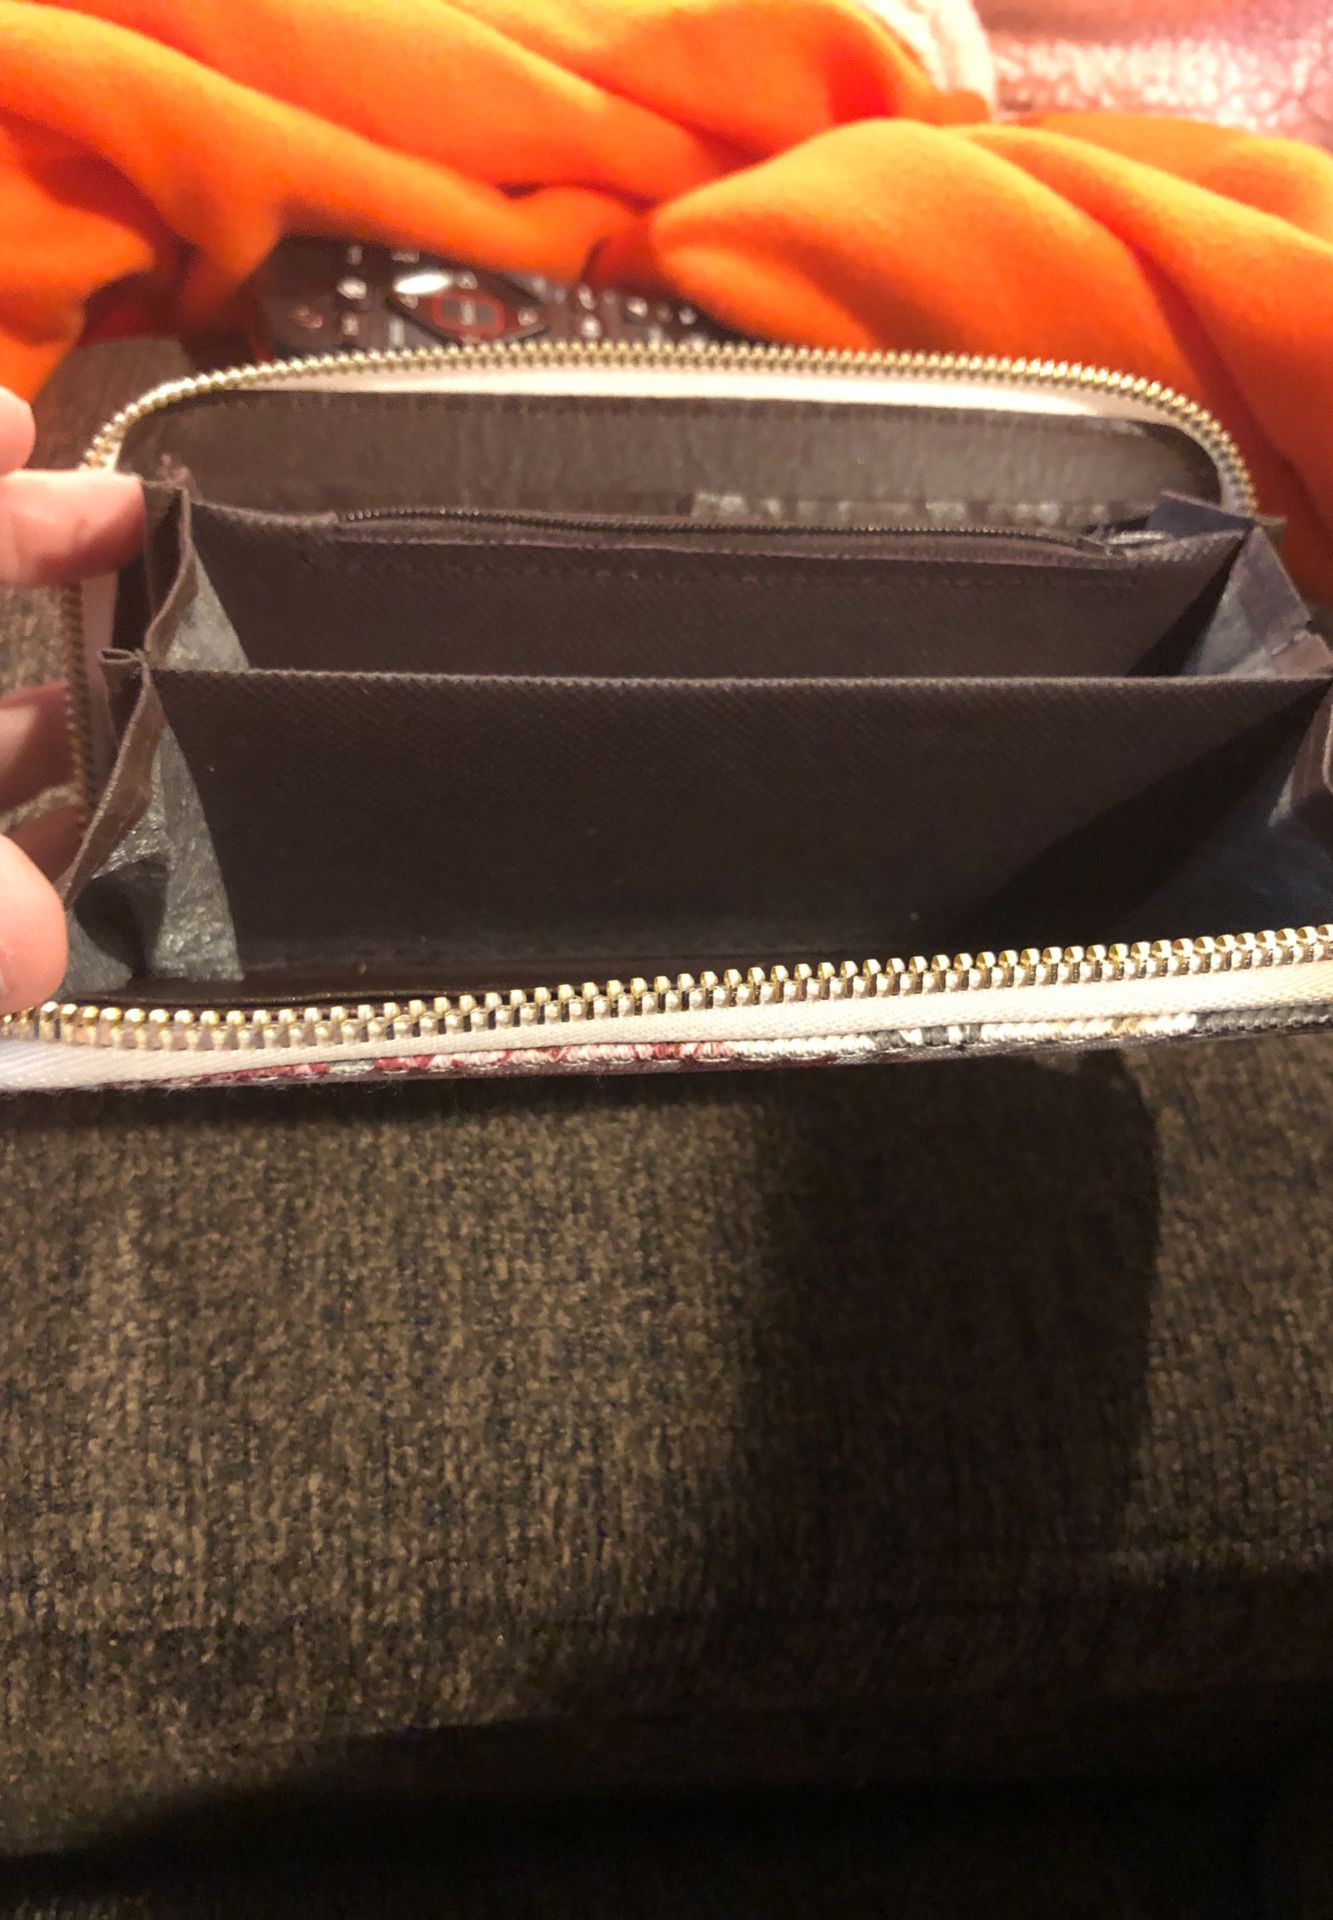 Wallet with wrist strap